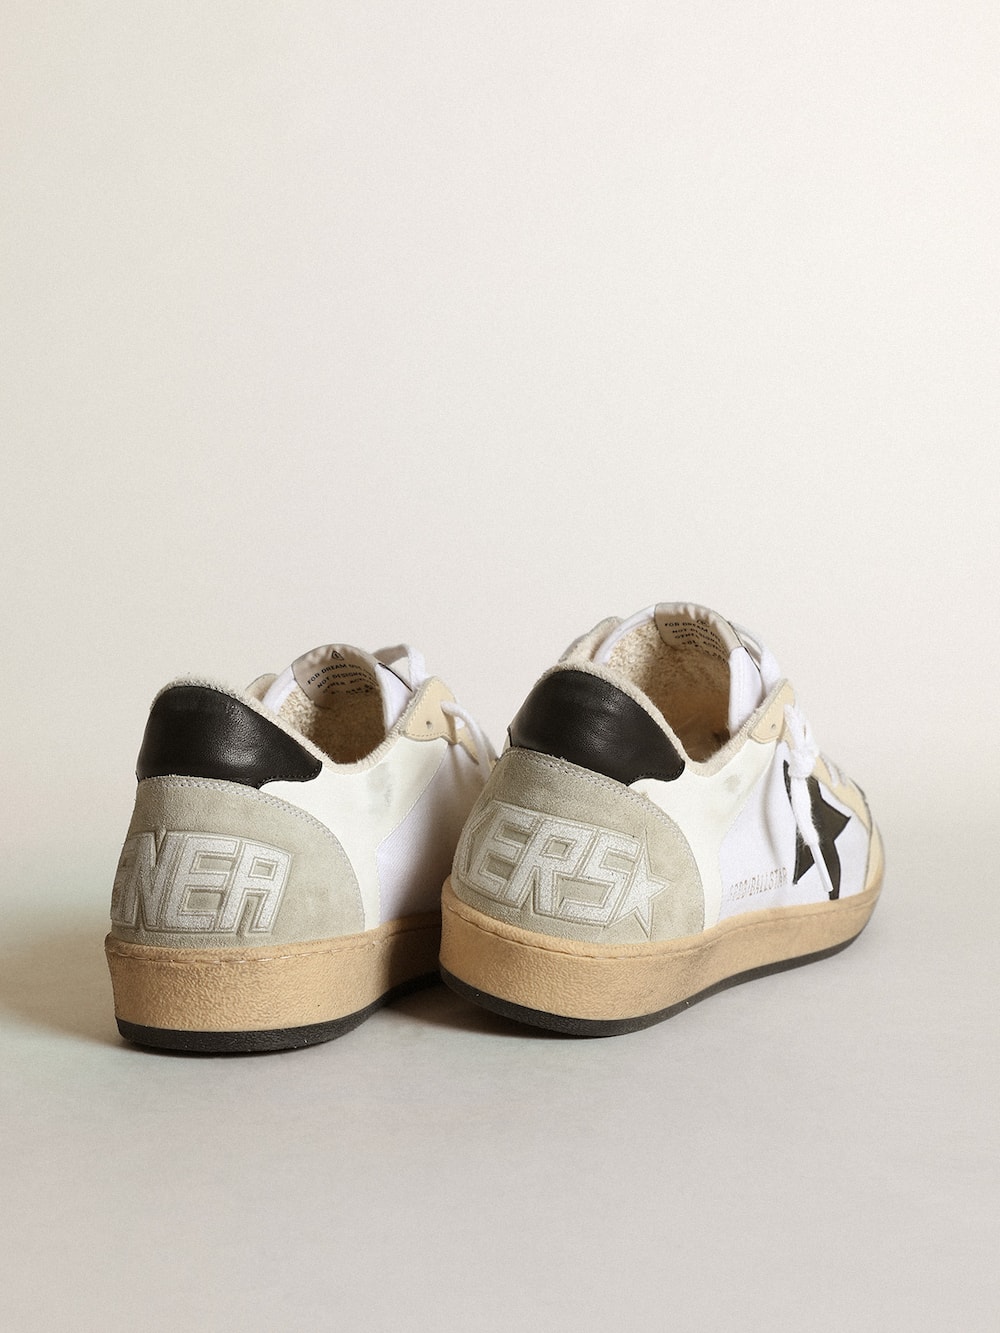 Golden Goose - Men's Ball Star in canvas and white leather with ivory inserts in 